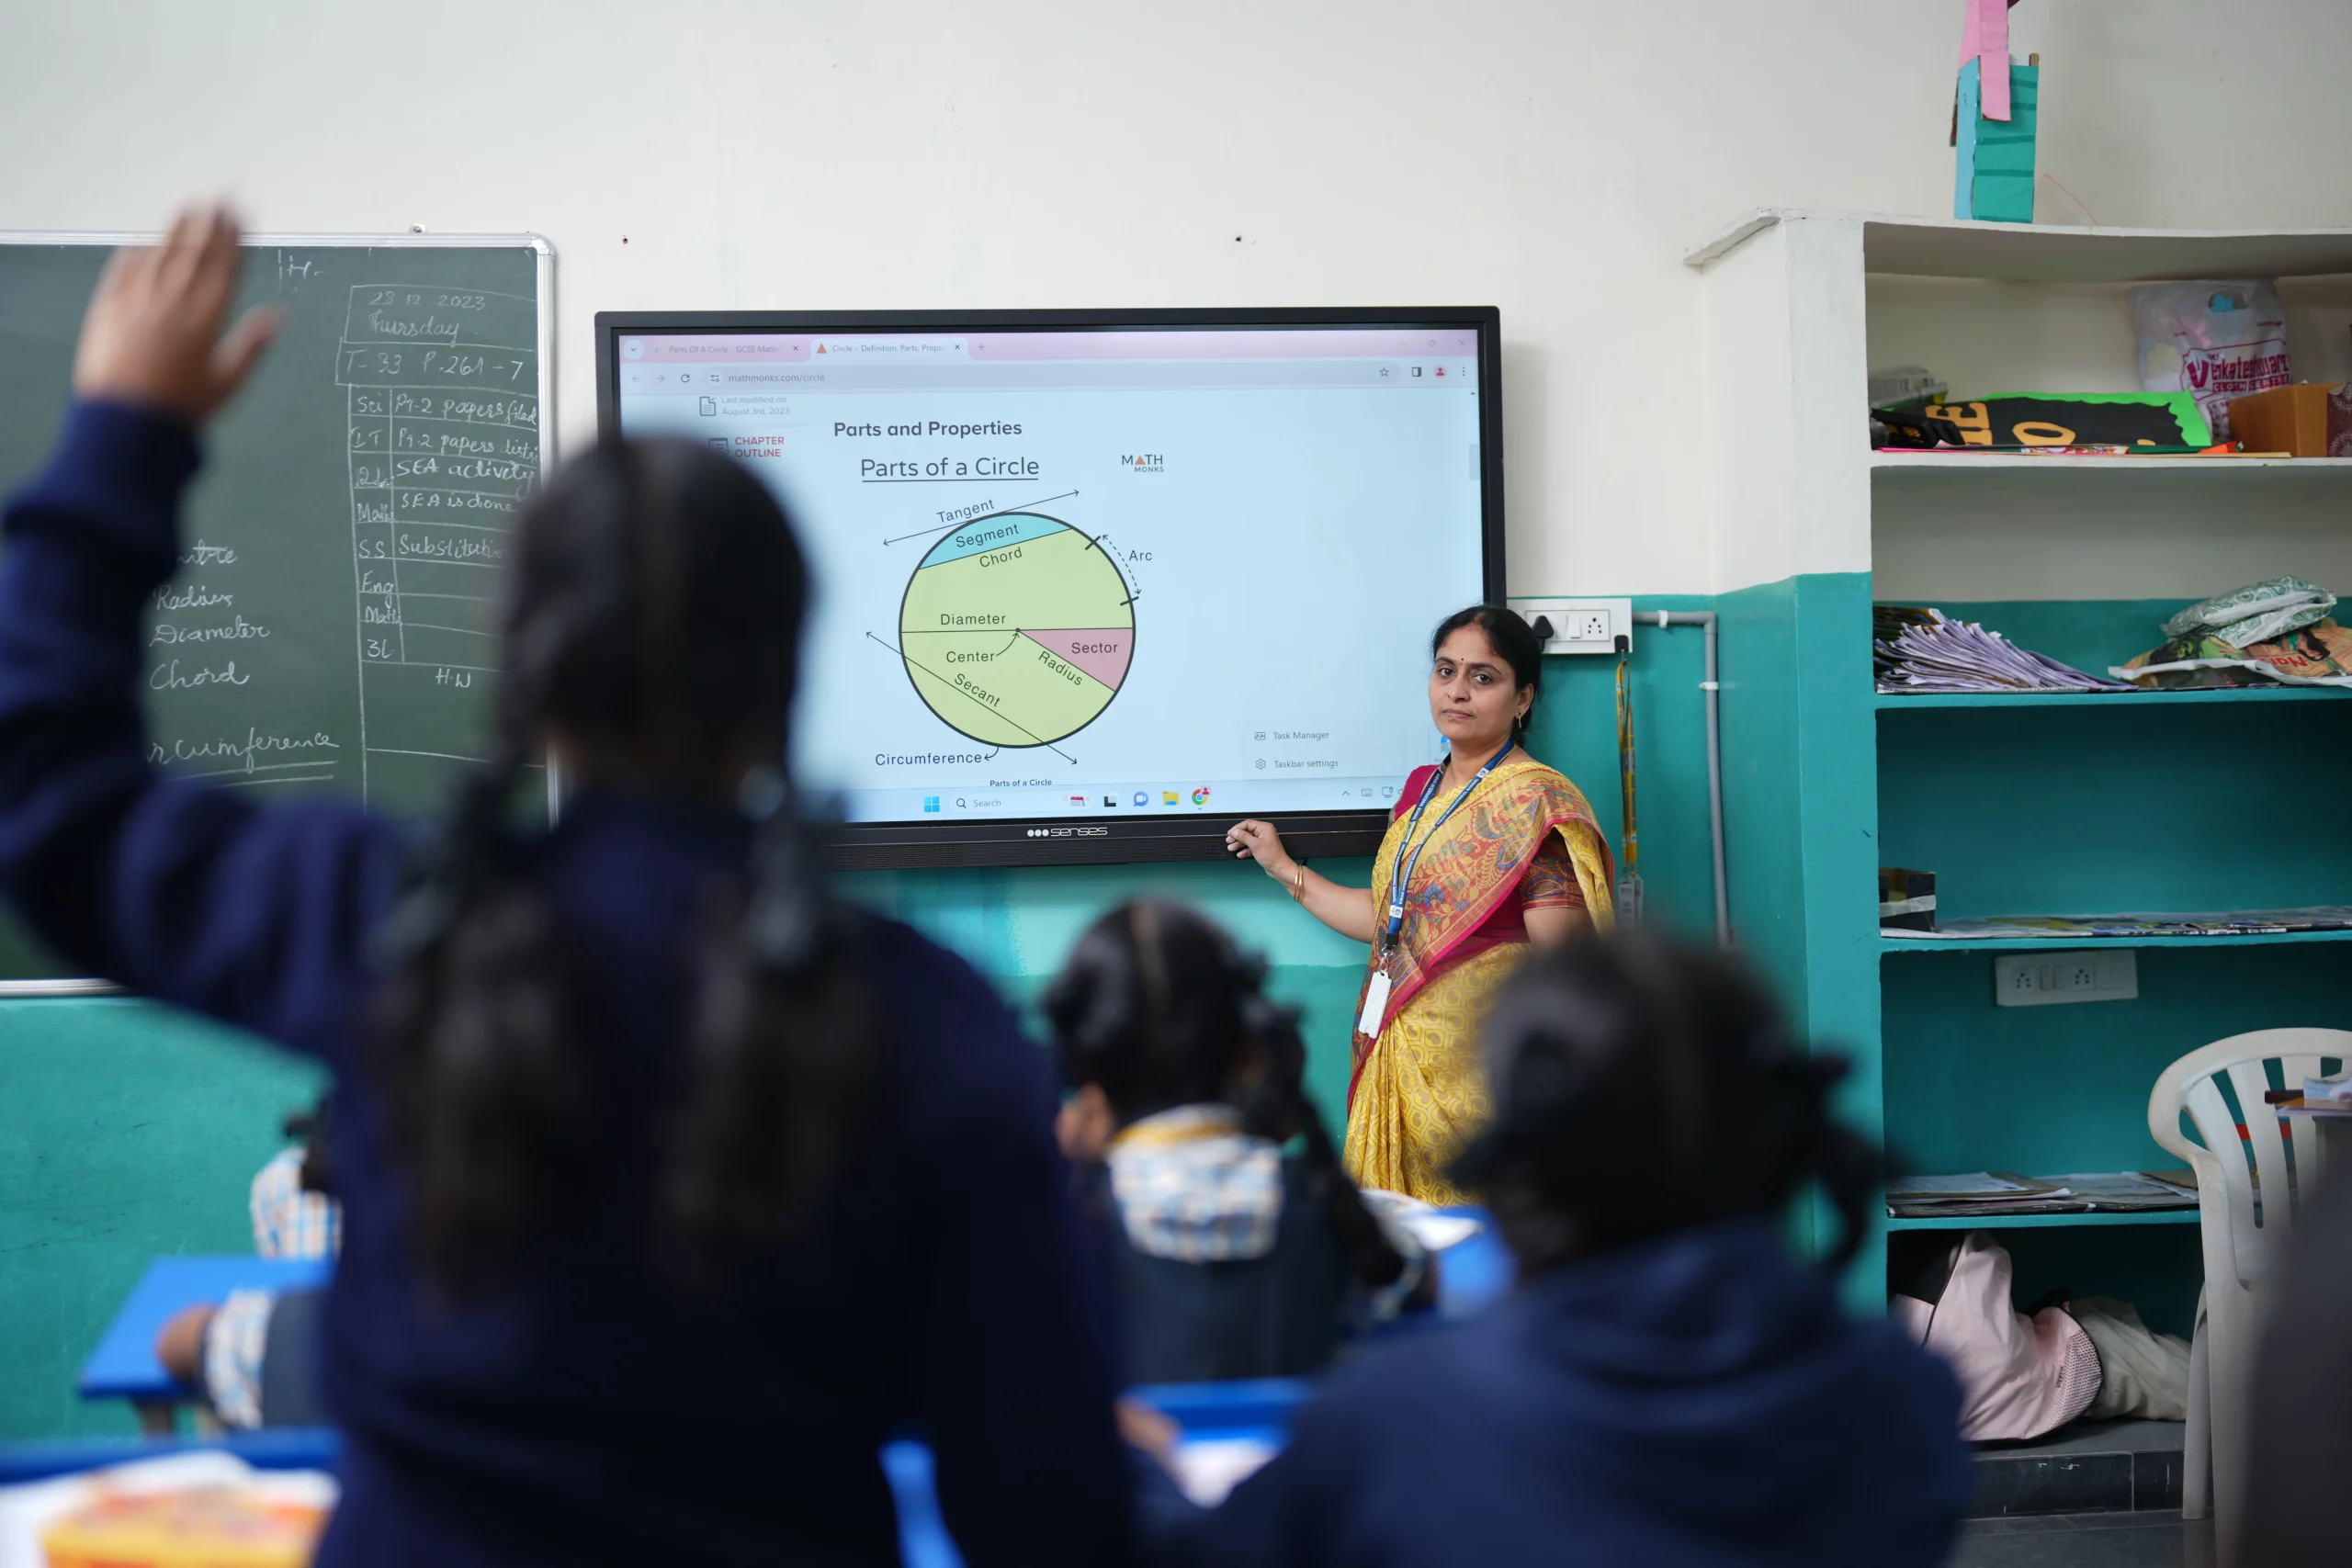 An interactive classroom scene at Kiran International School, with a teacher using aids and a digital board to facilitate engaging and modern teaching methods, enhancing the learning experience for students.